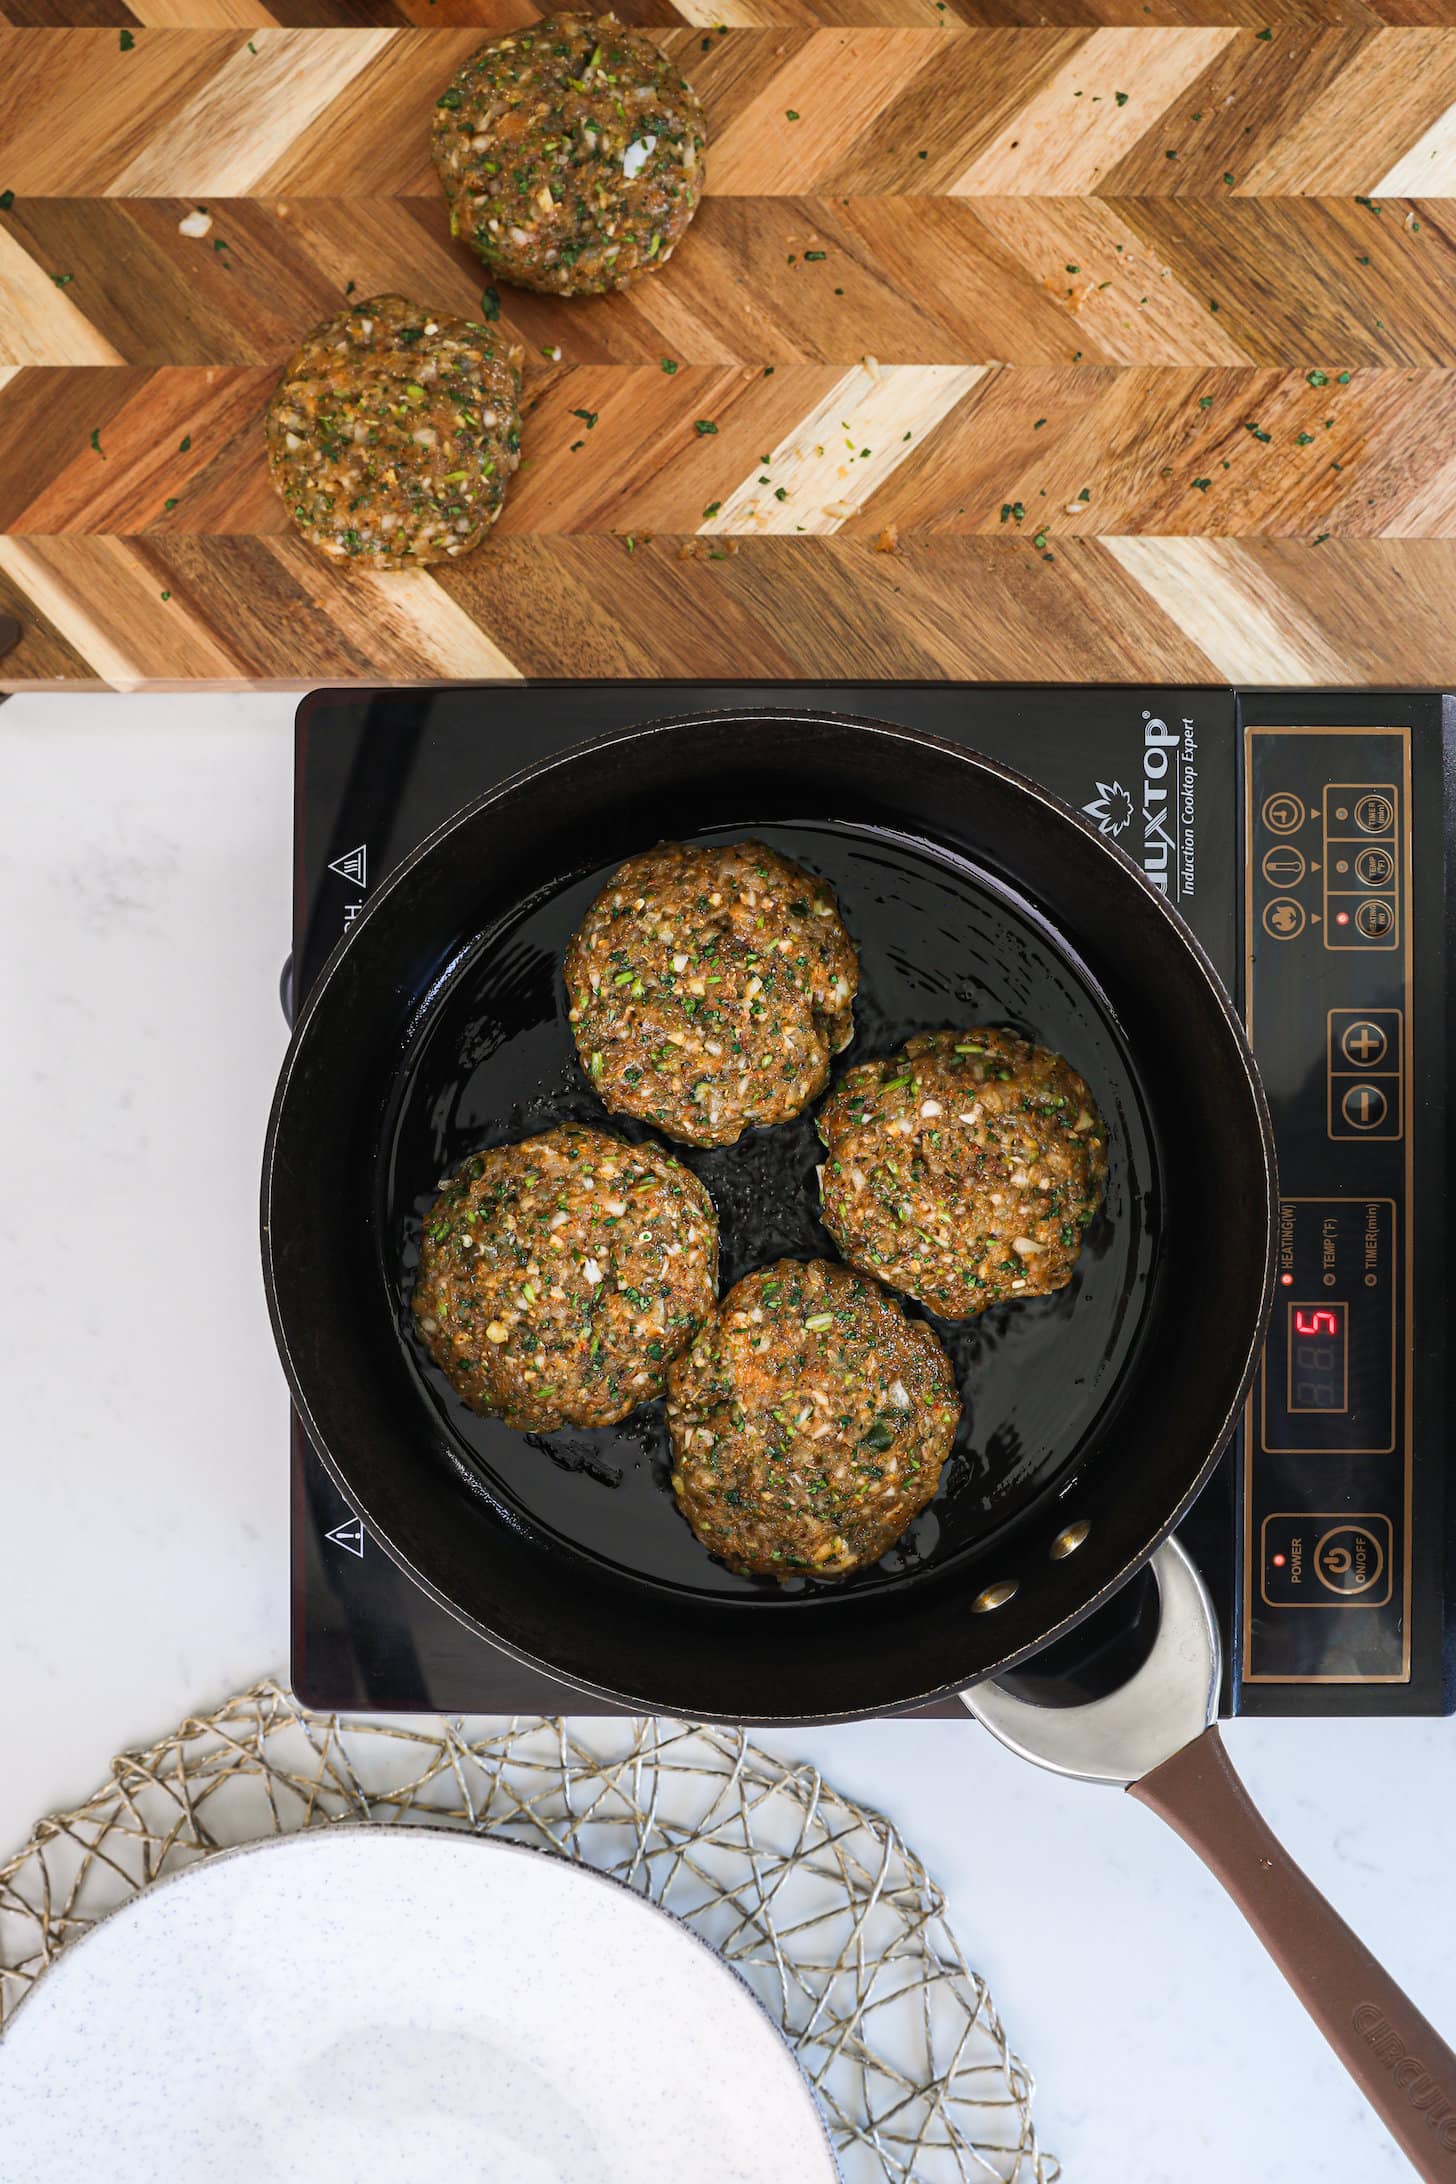 a pan of four patties on a mobile cooktop